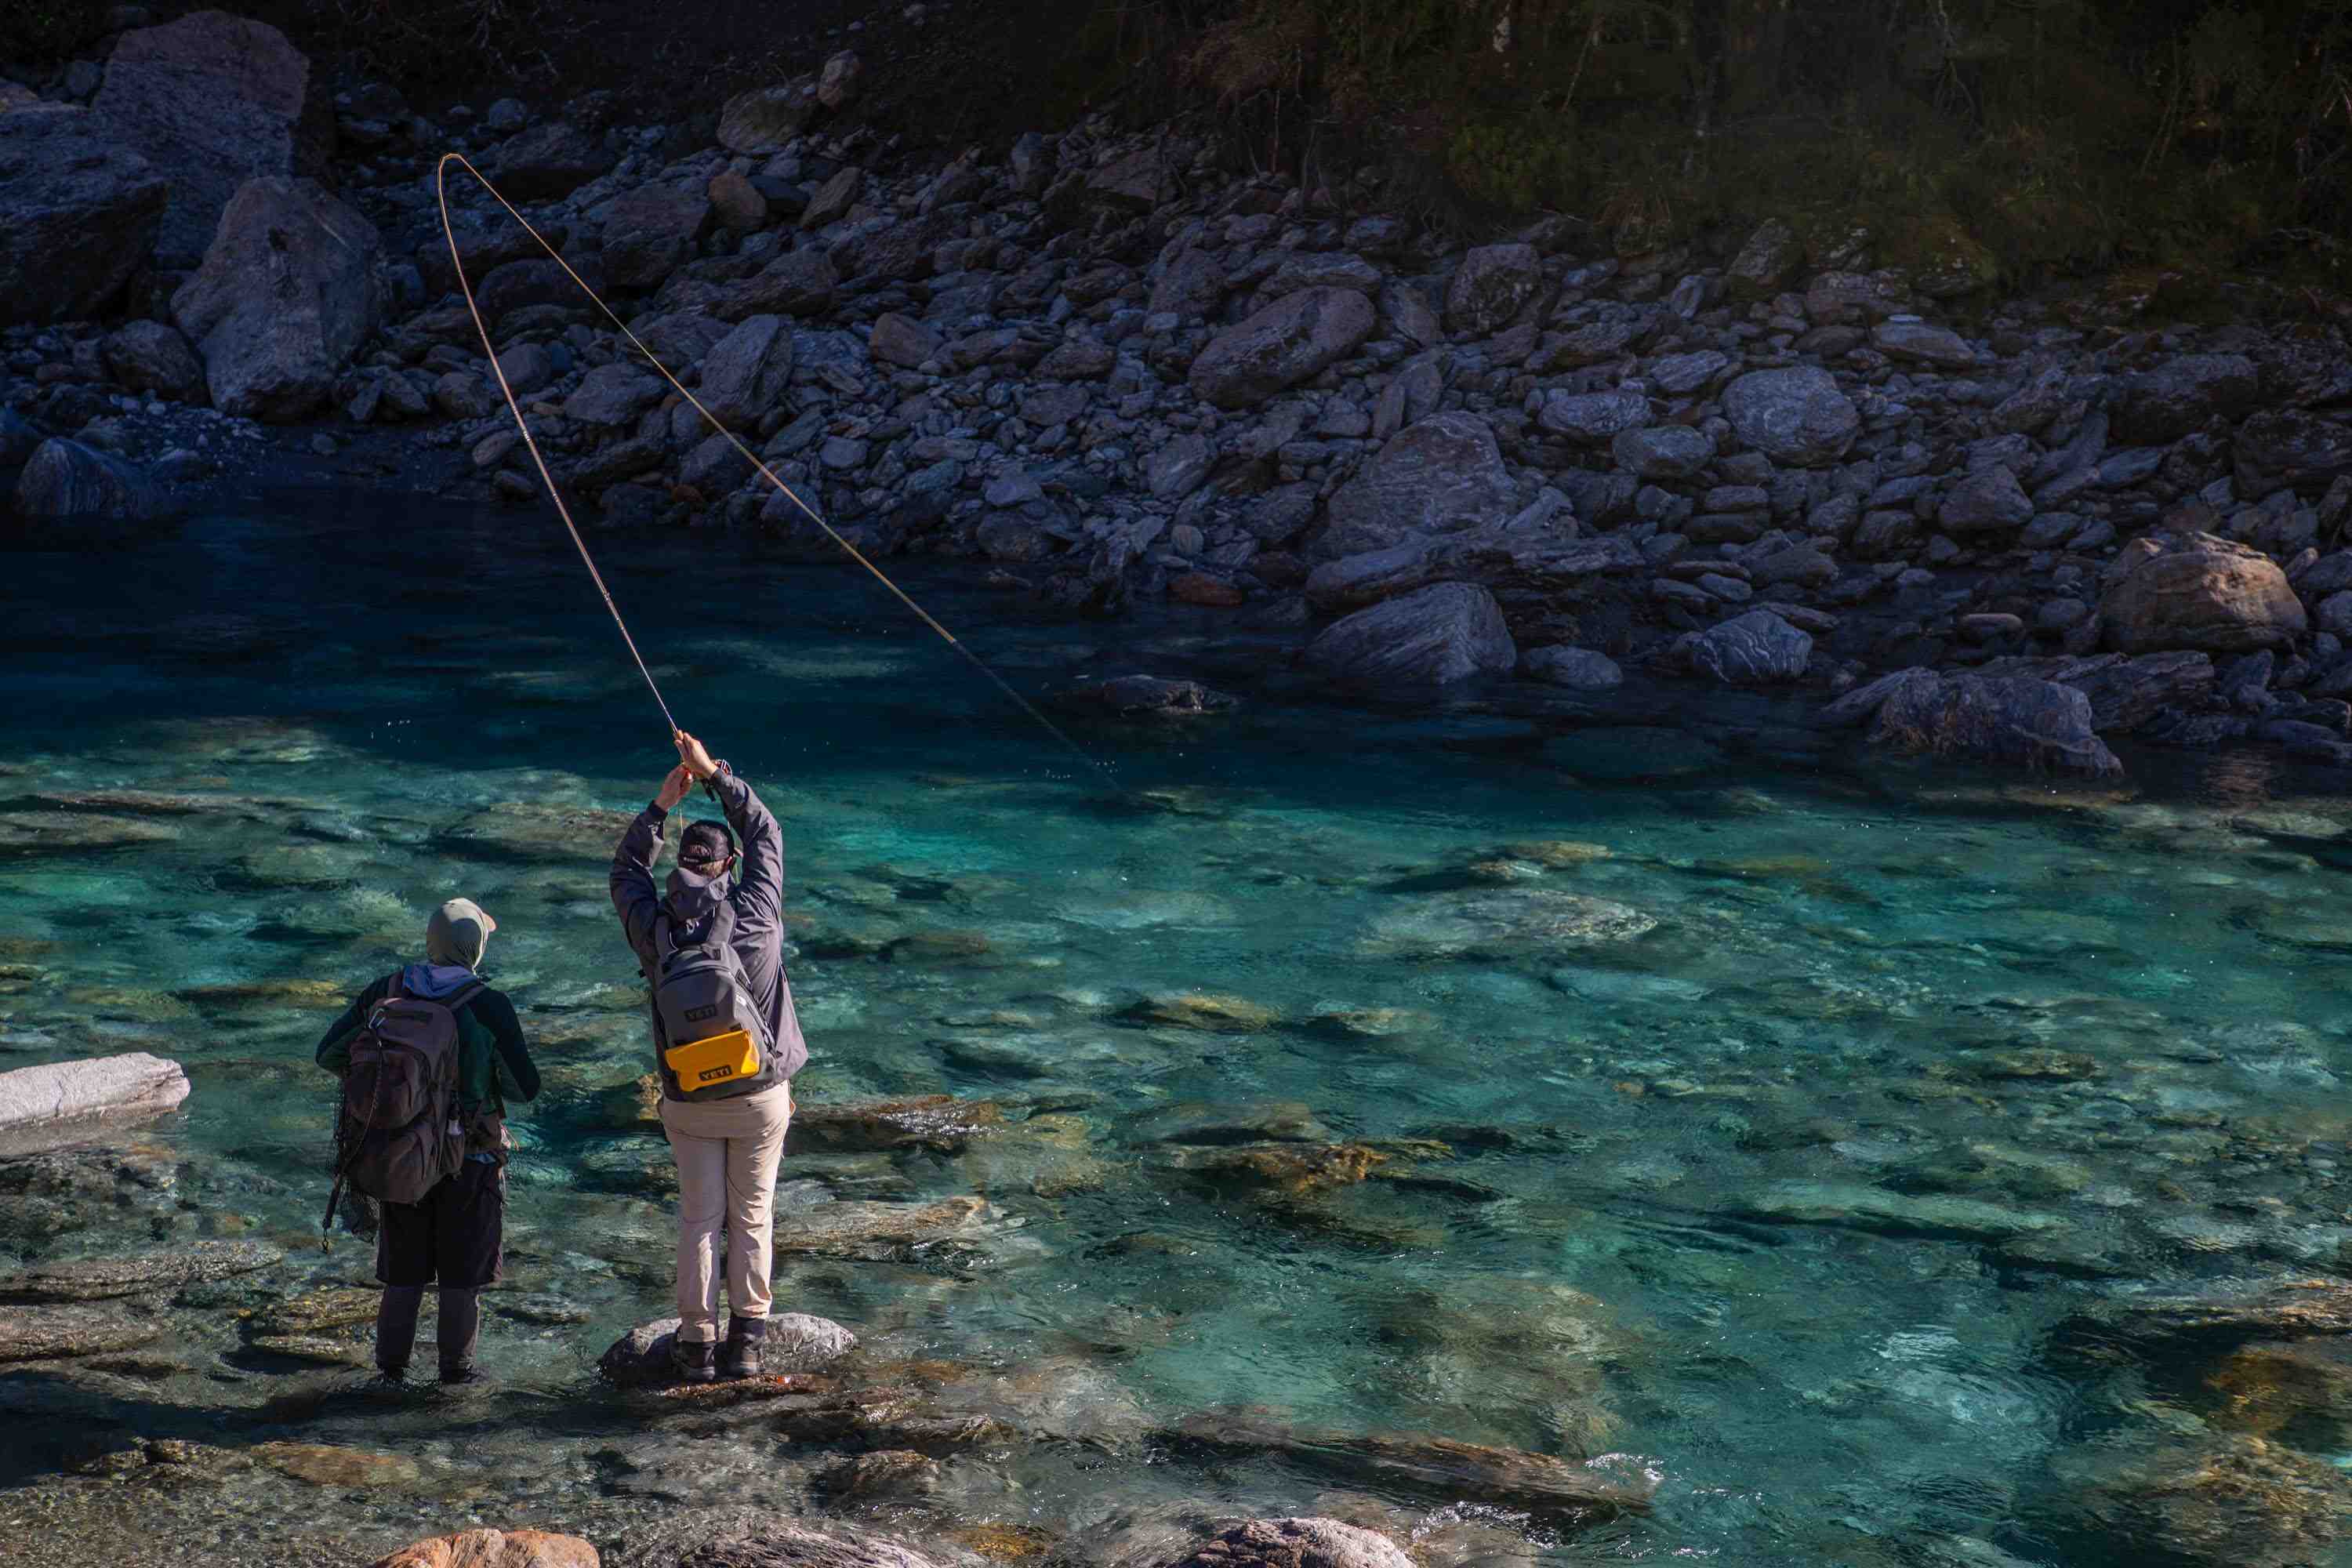 On the fly: Après with your fly rod